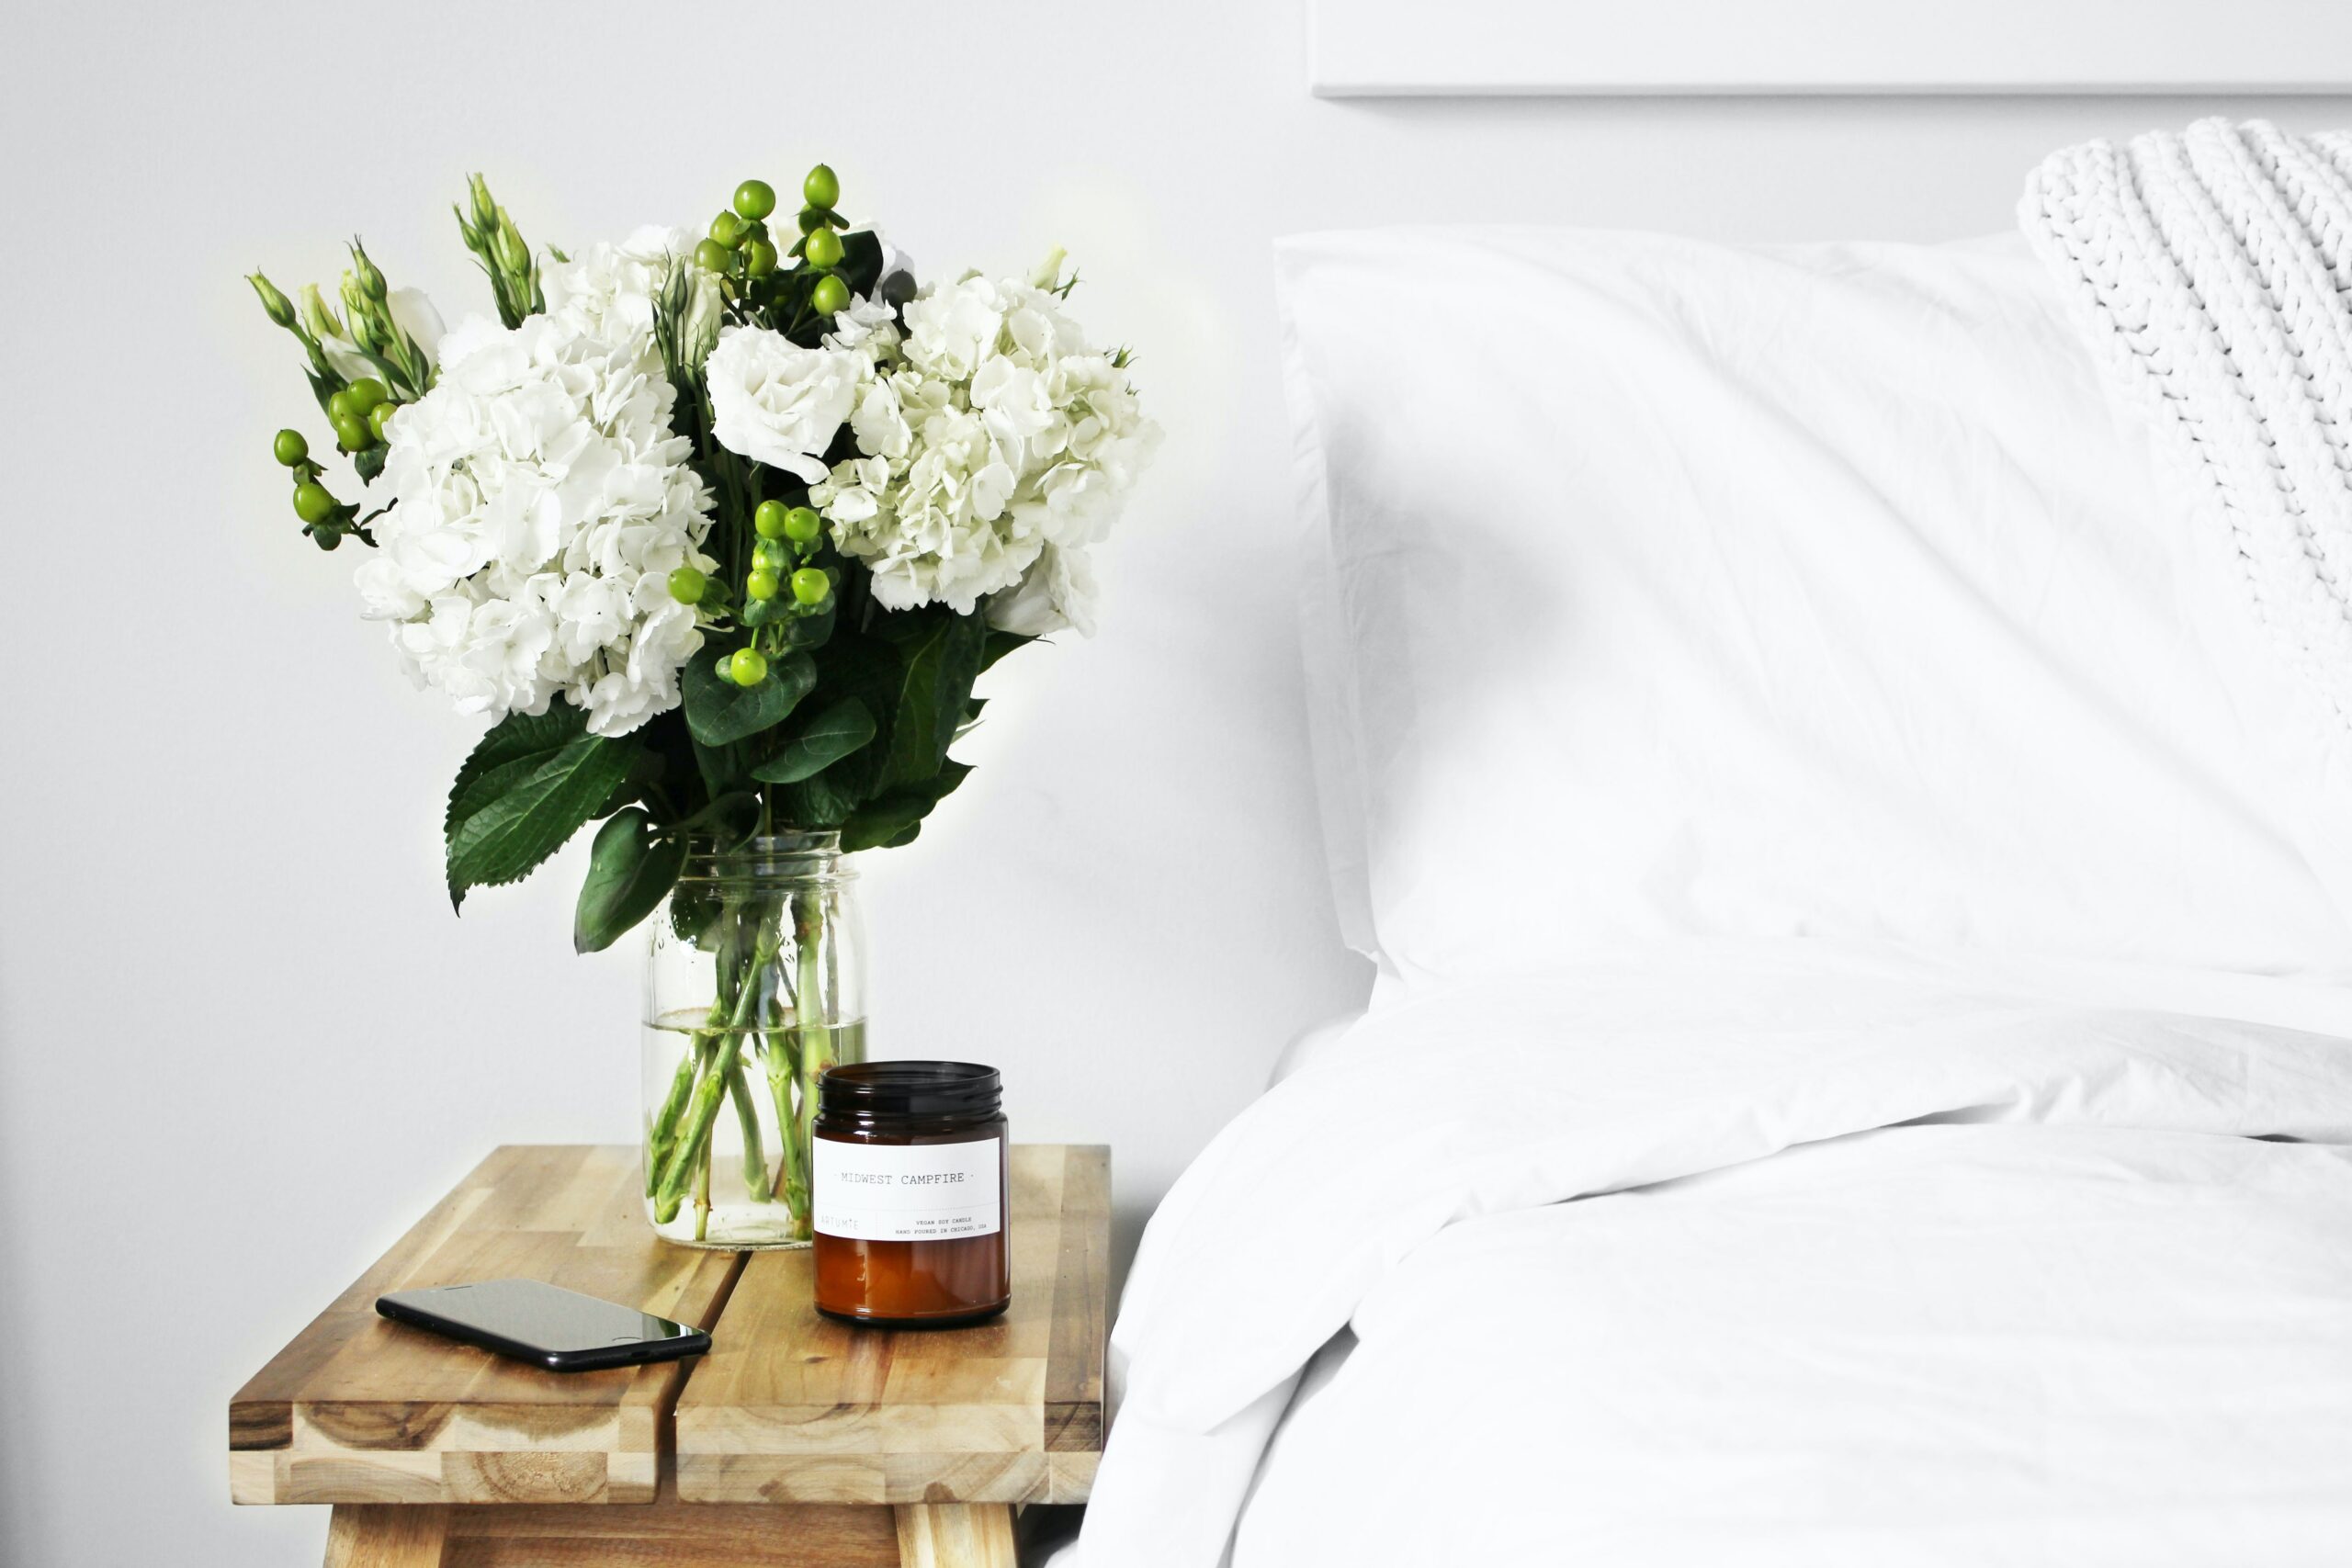 bed and side table with plant Photo by Logan Nolin on Unsplash